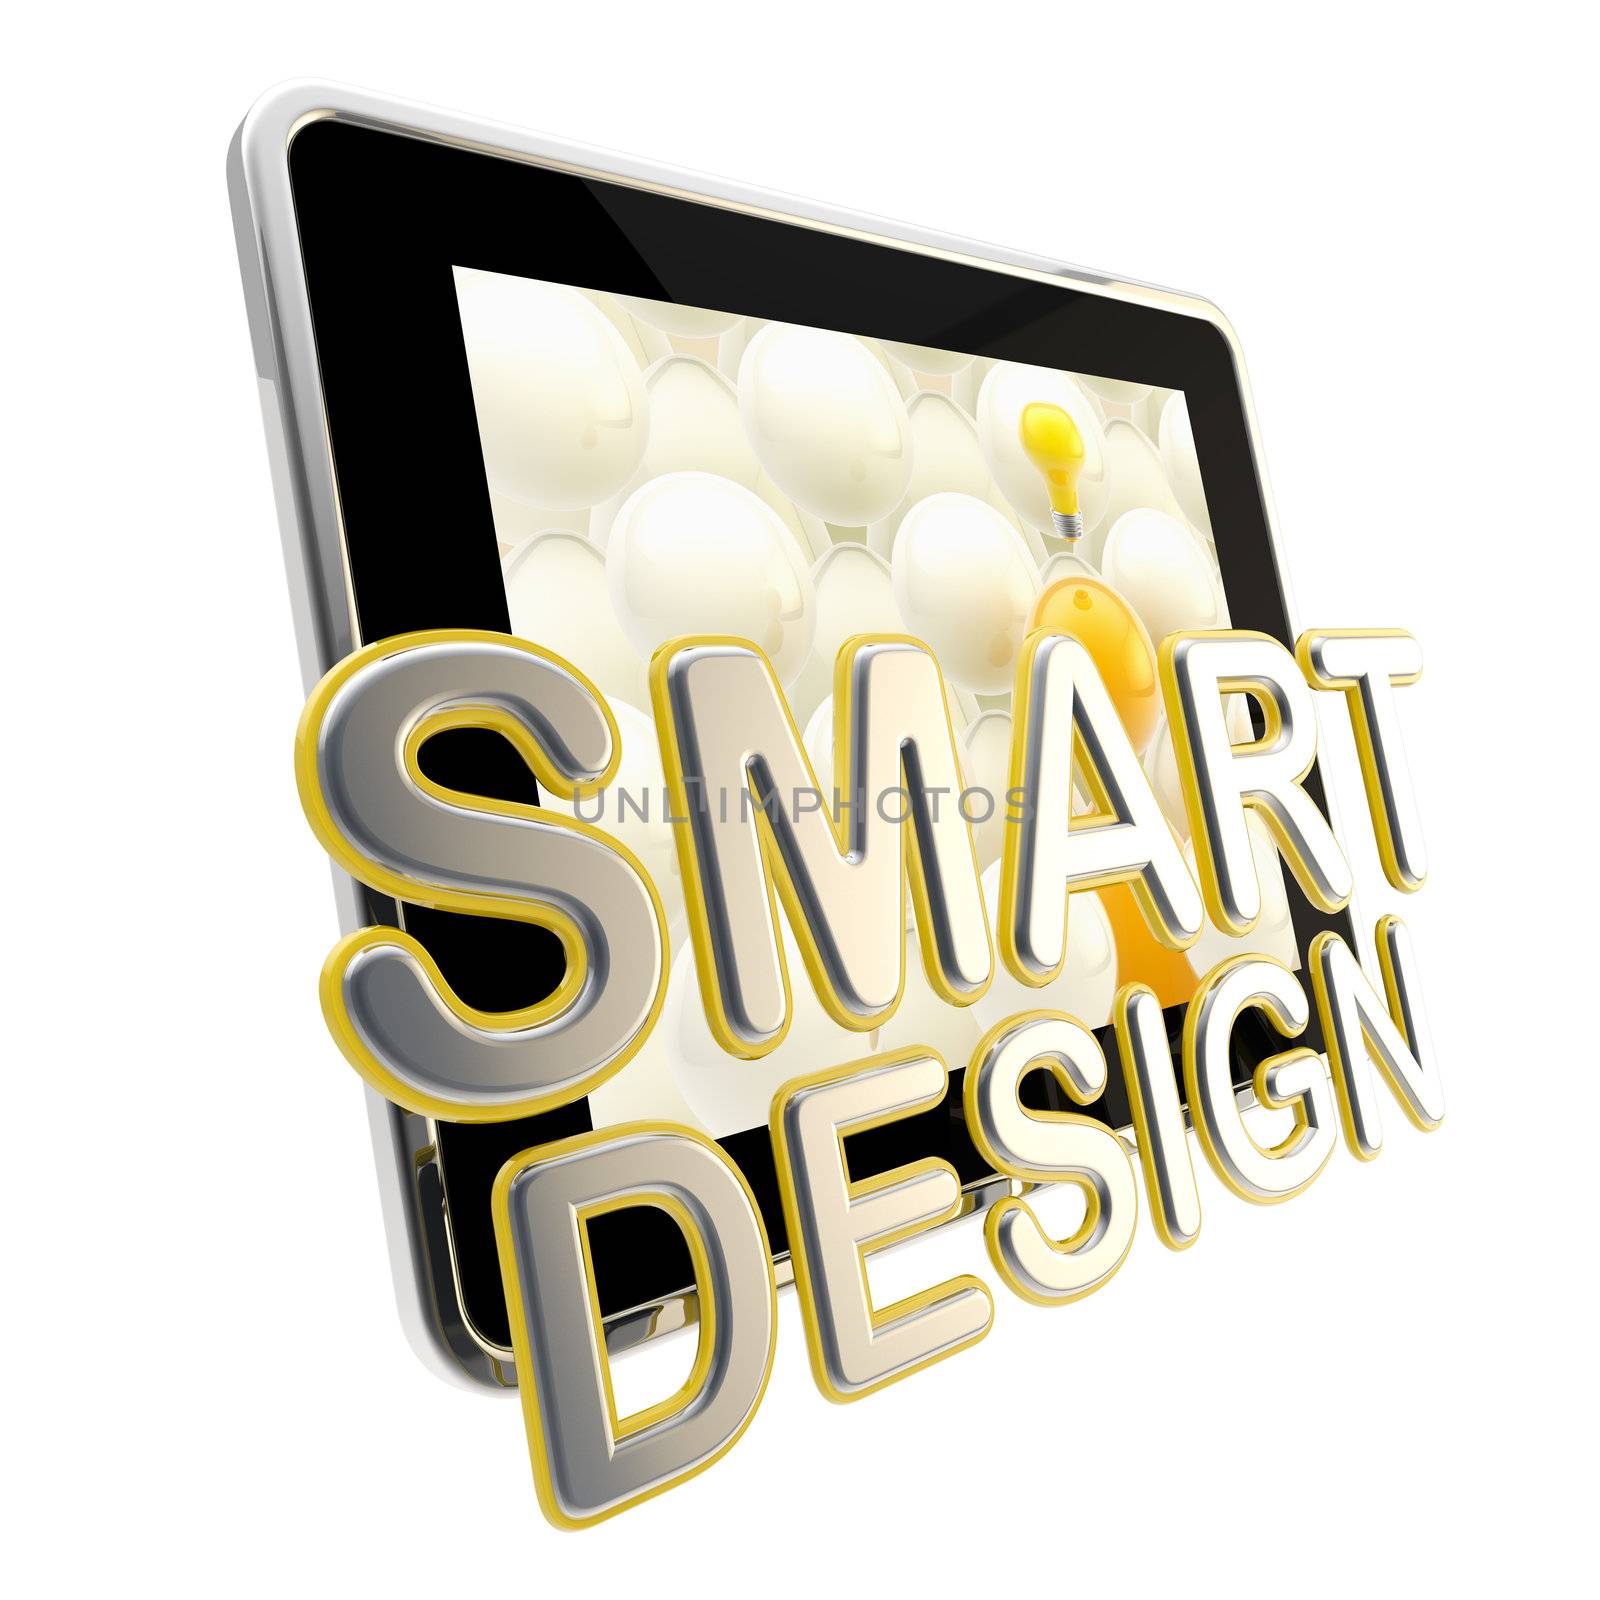 Flat glossy computer pad screen as a smart design emblem isolaed on white